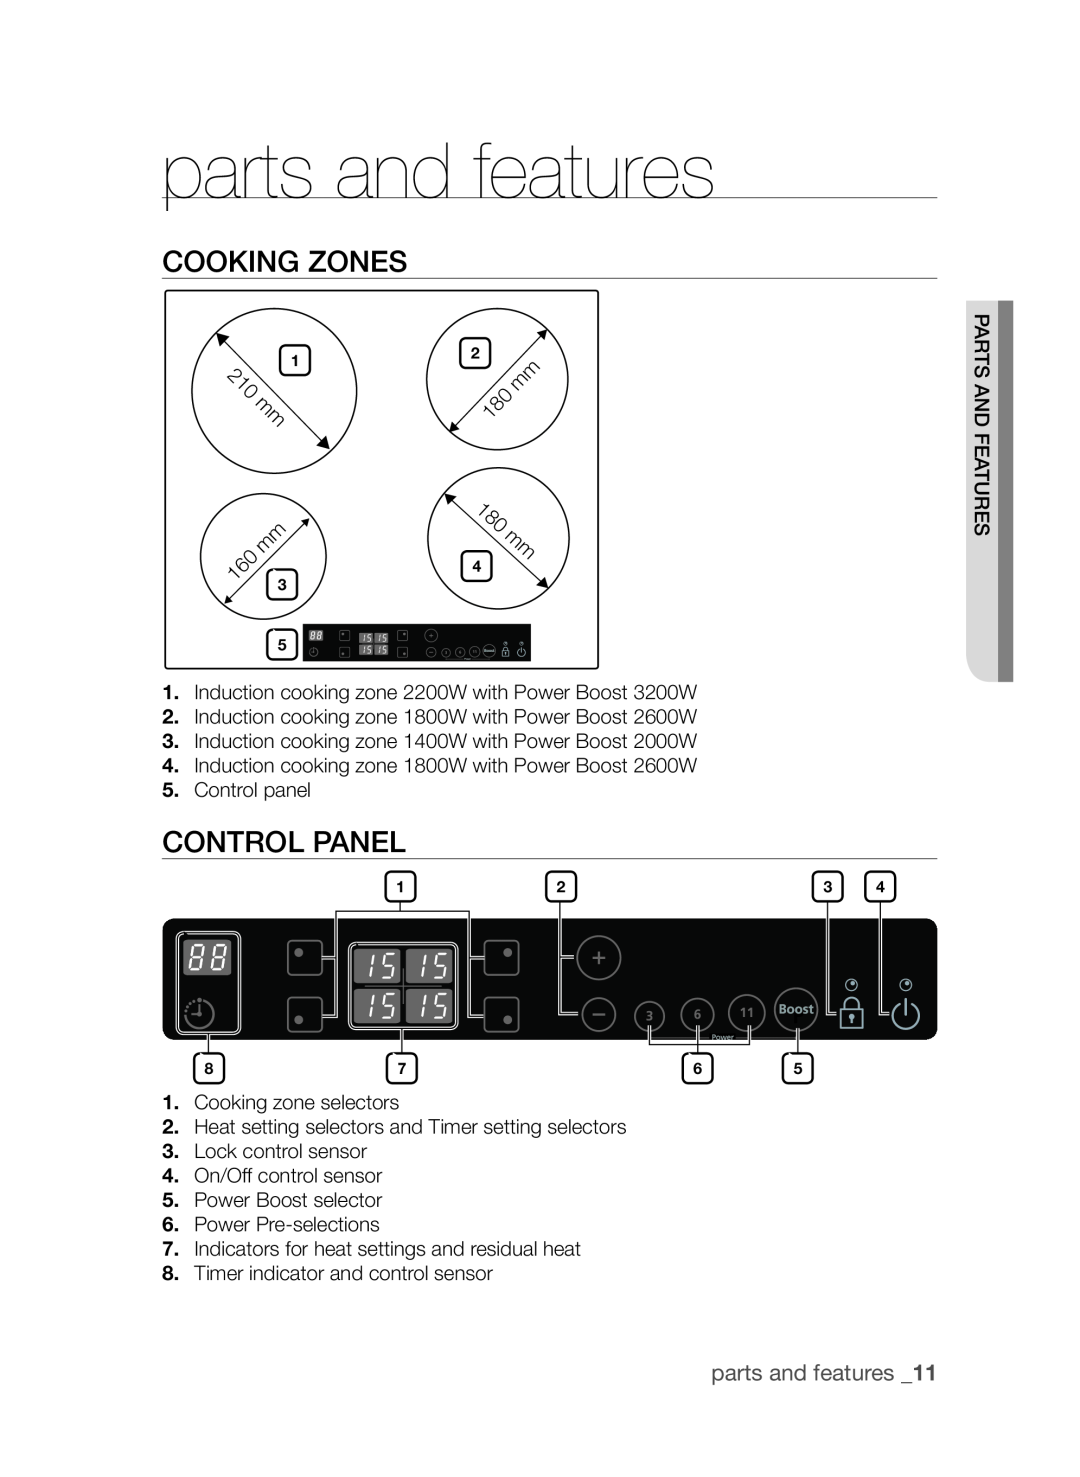 Samsung CTI613EH, CTN364D001 user manual parts and features, Cooking zones, control panel 